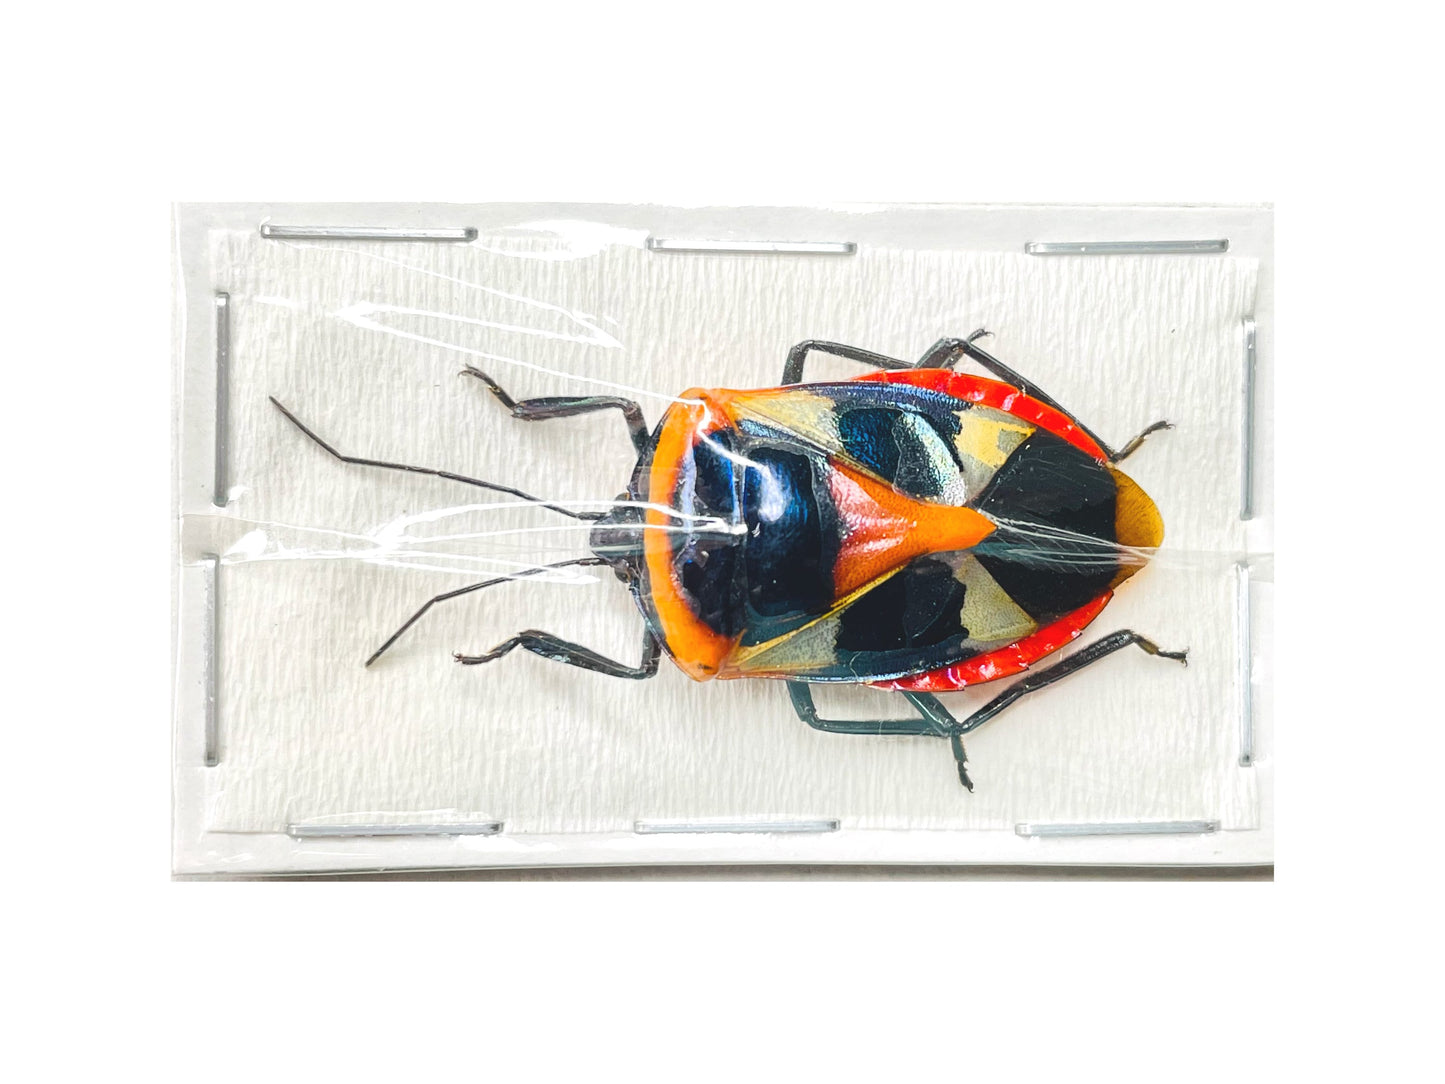 Man Face Bug Catacanthus nigripes Real Insect Taxidermy A2 Condition